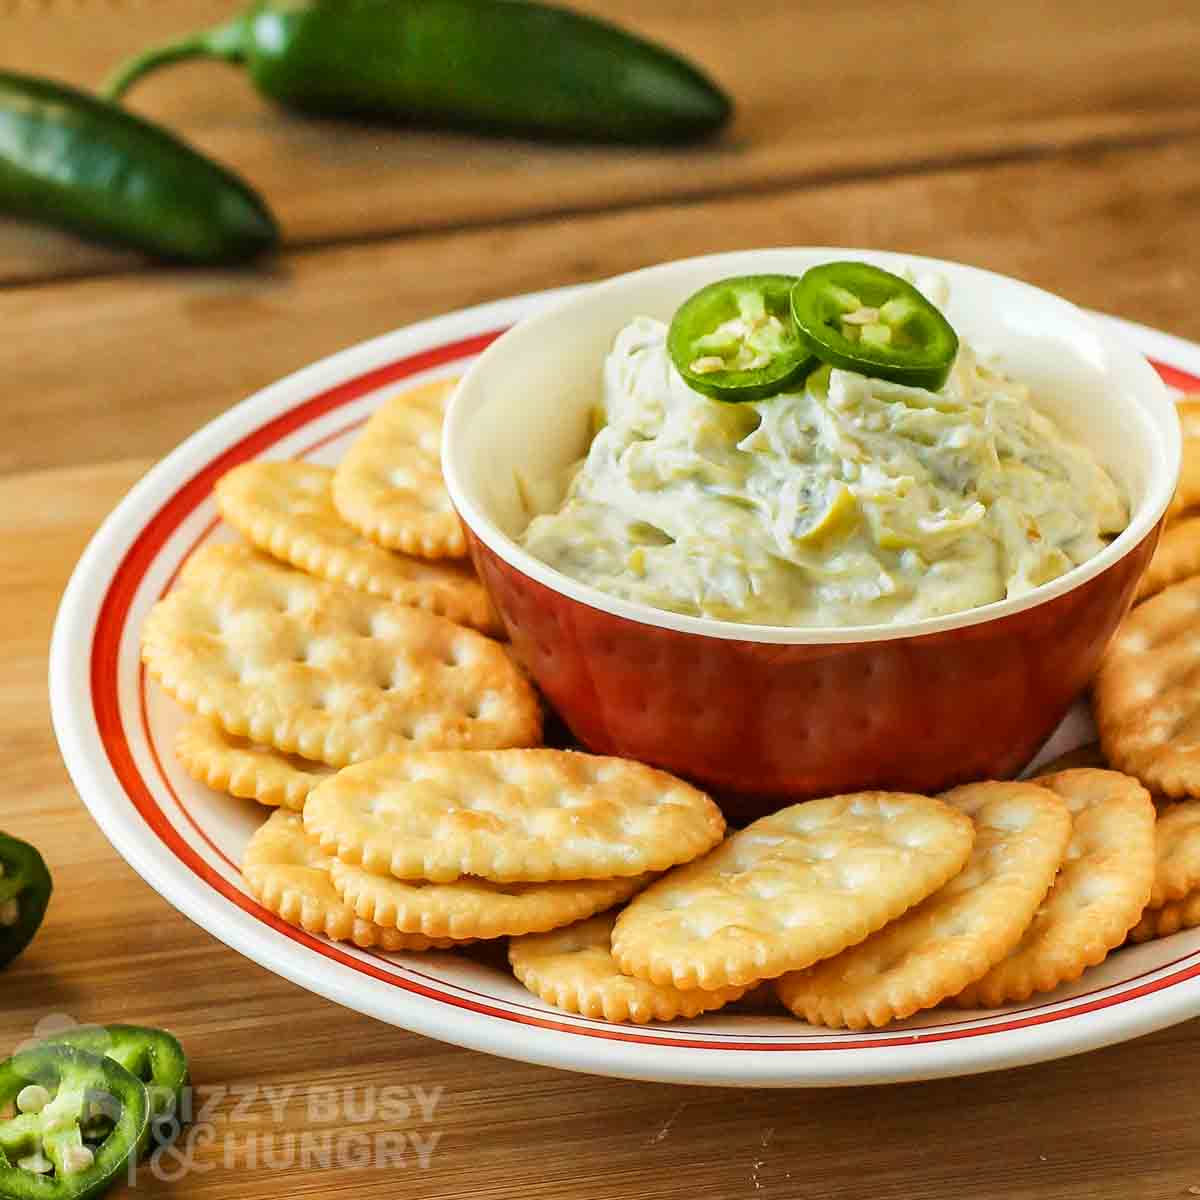 Side view of jalapeno artichoke dip in a red bowl surrounded by a ring of crackers on a red and white plate.